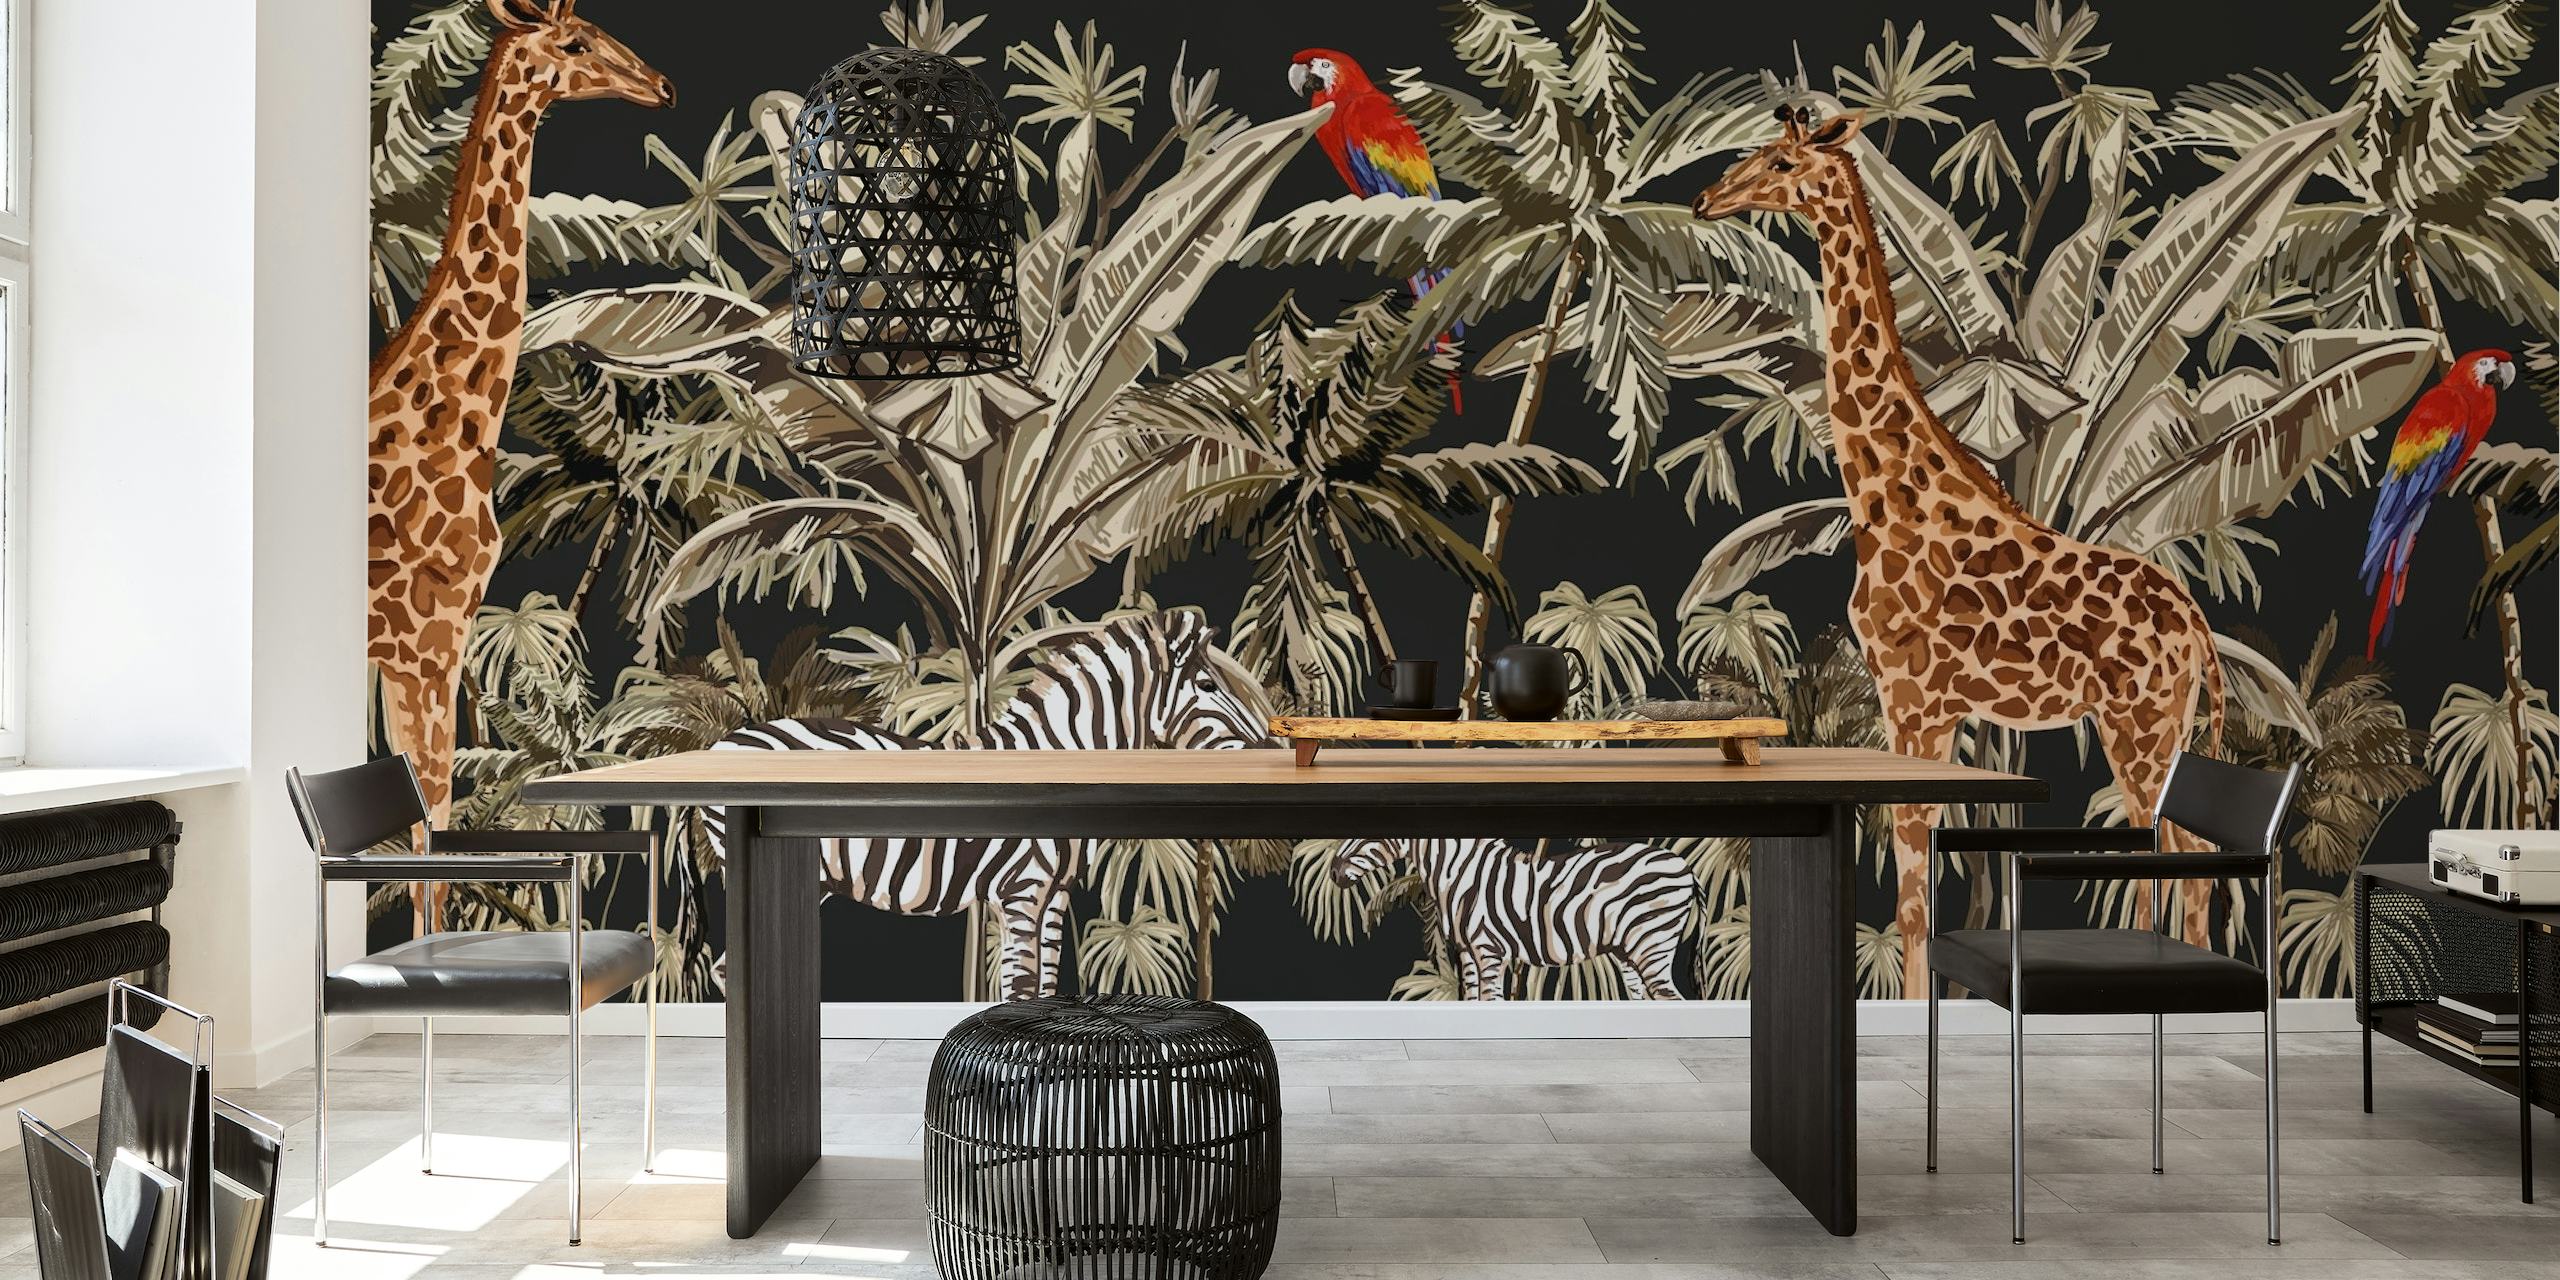 Wall mural of giraffes and zebras among palm trees on a black background